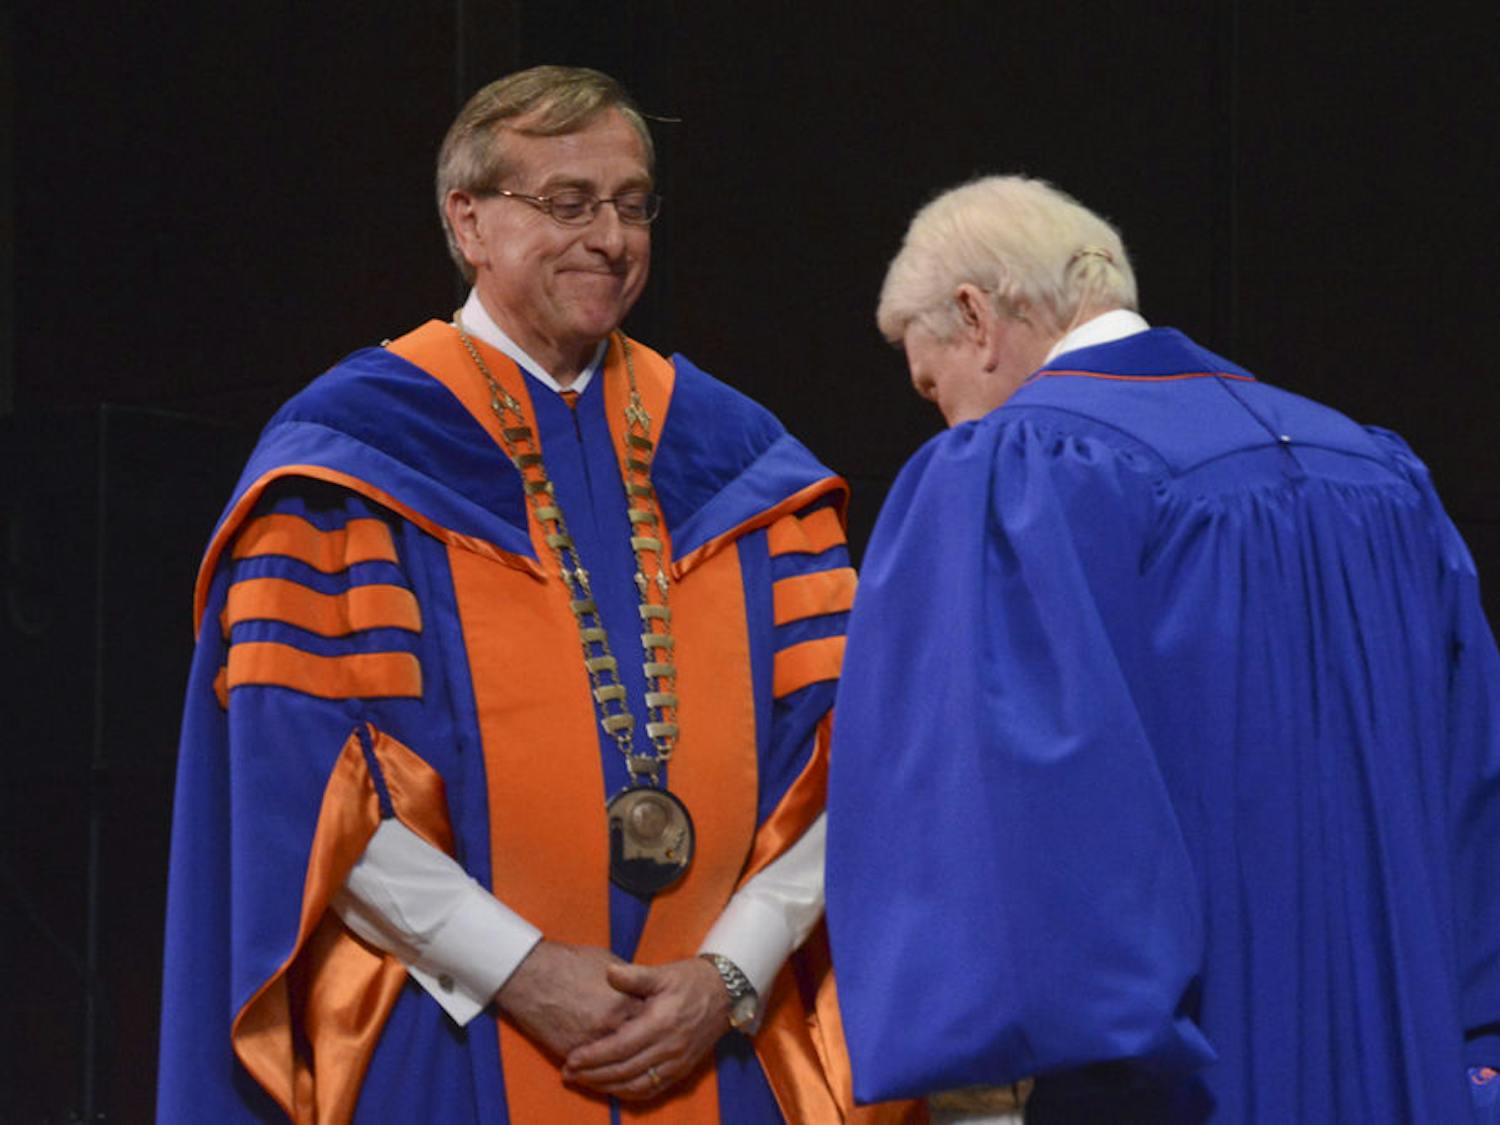 UF President Kent Fuchs receives the presidential chain of office on Dec 4, 2015. The inauguration ceremony officially welcomed him as UF’s 12th president.